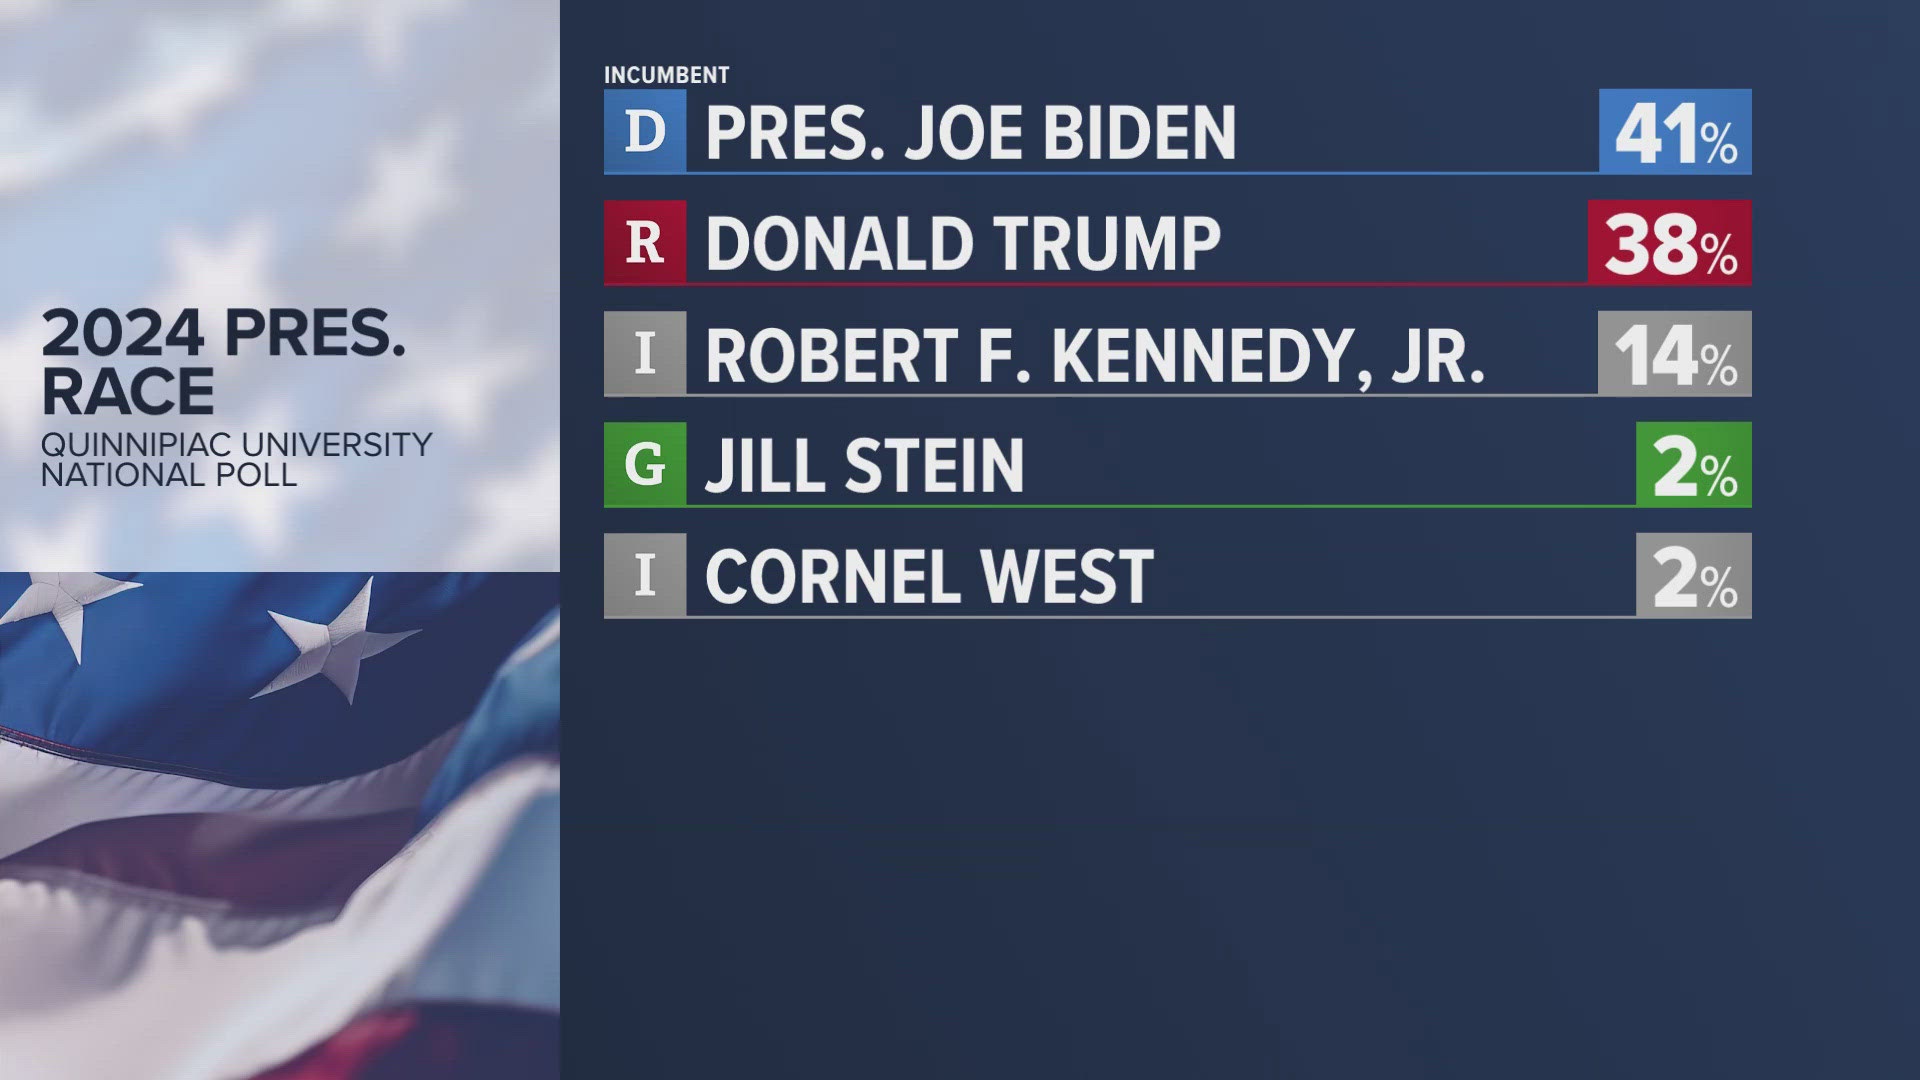 A new poll has been released from Quinnipiac University on the upcoming presidential election.